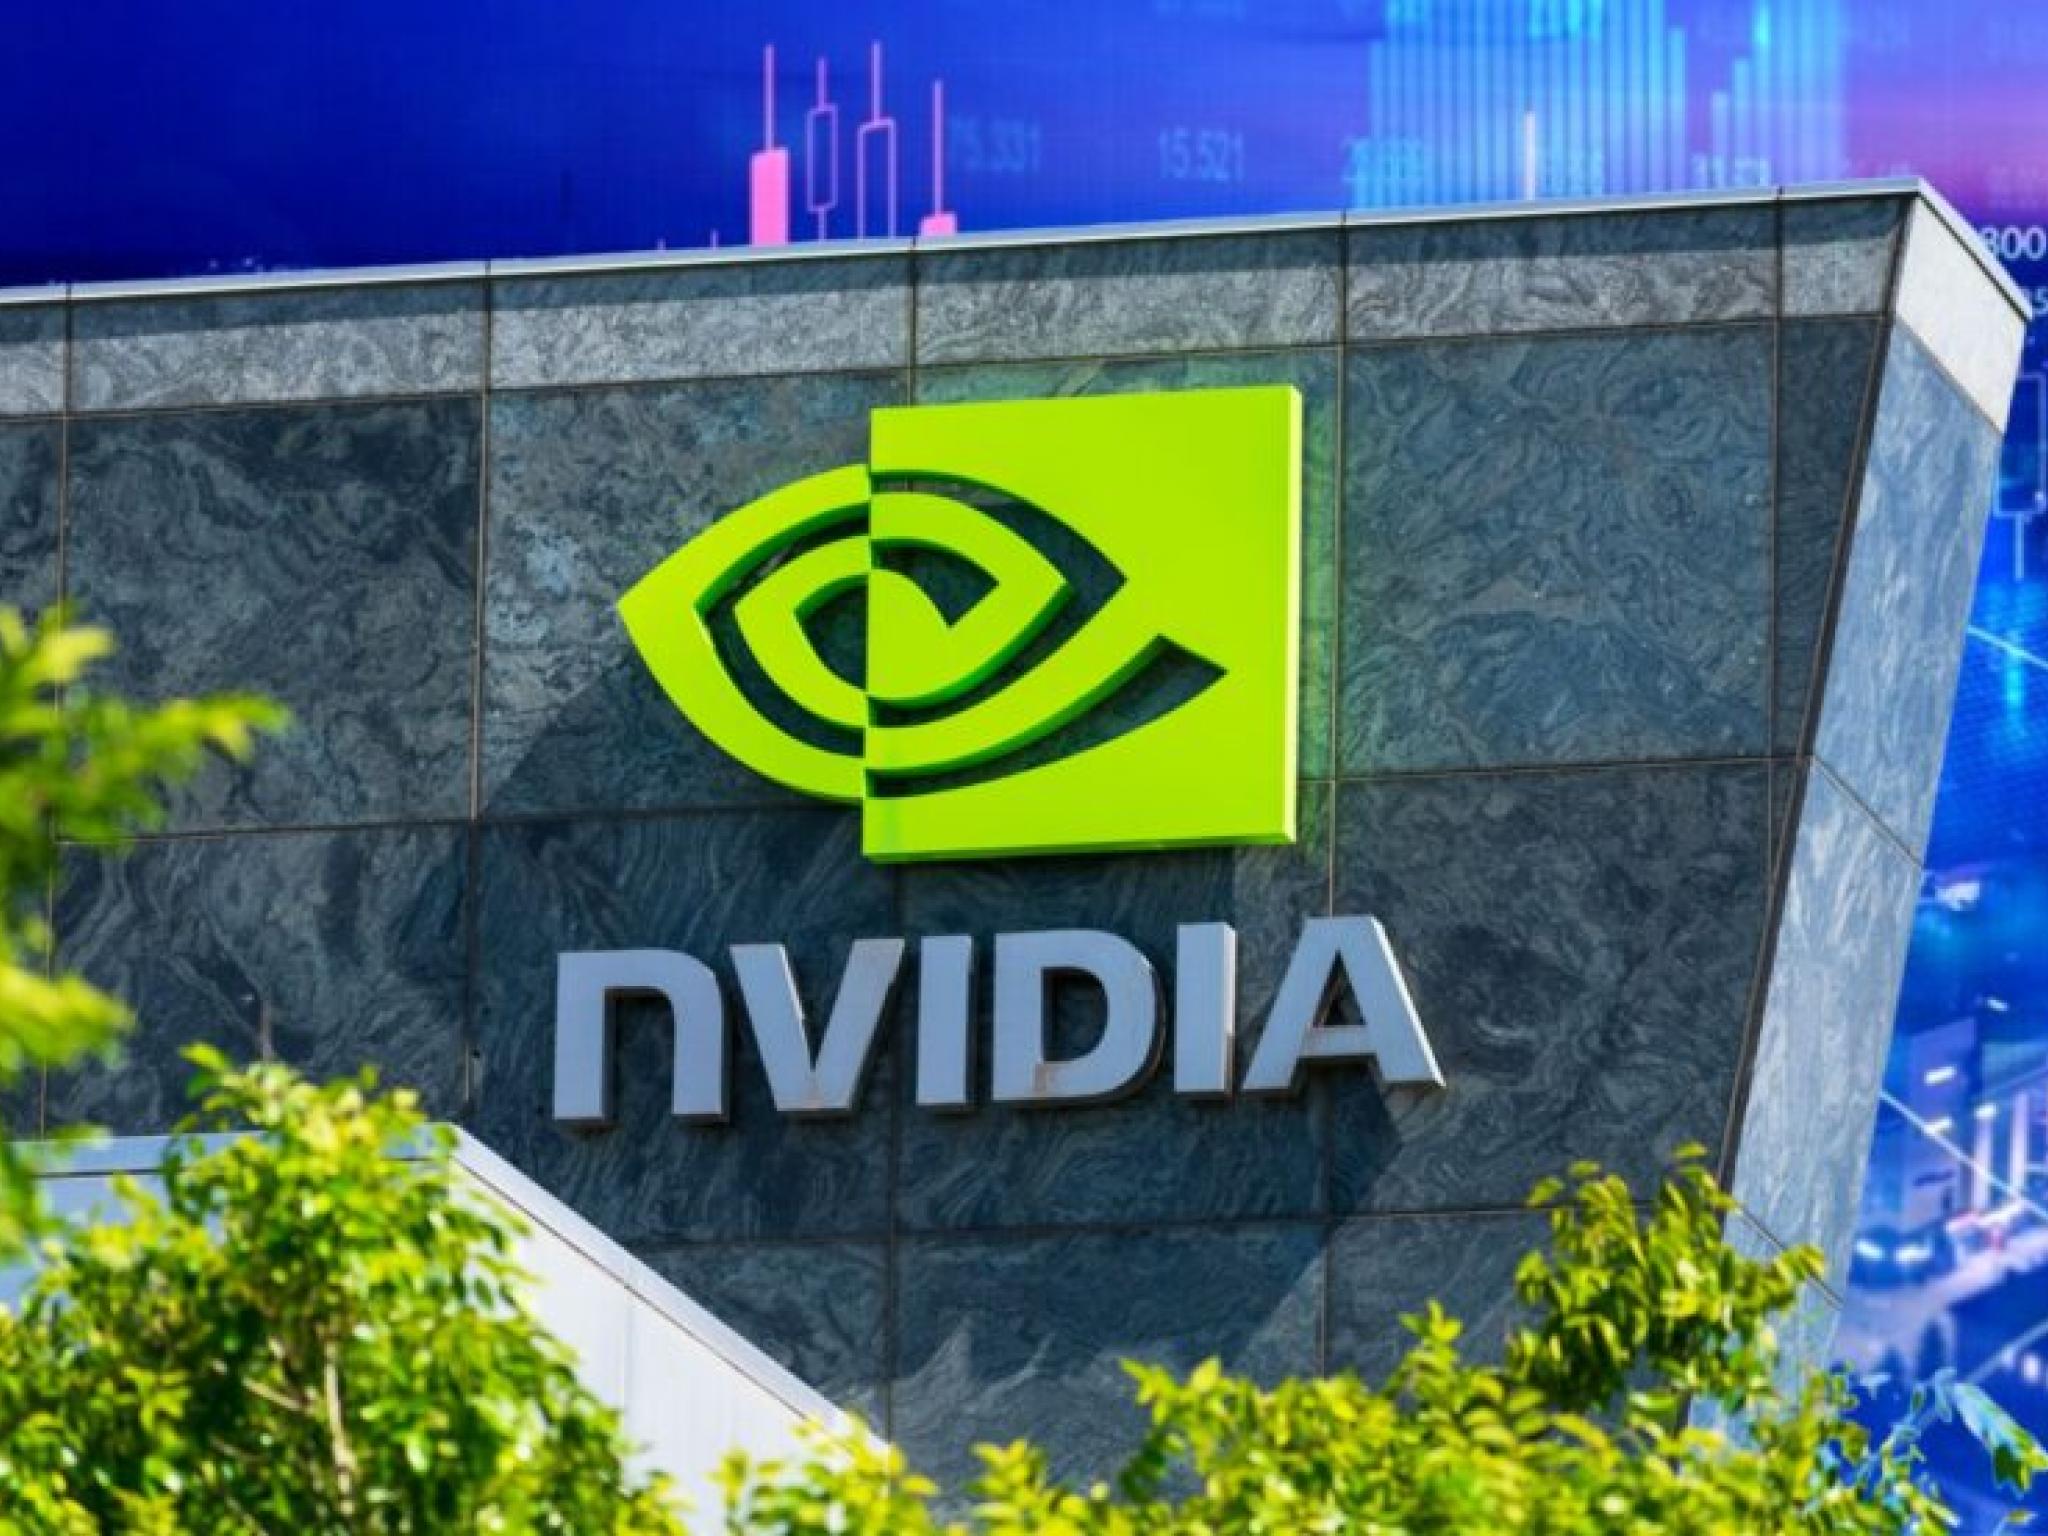  stock-of-the-day-where--and-when--will-nvidia-sell-off-end 